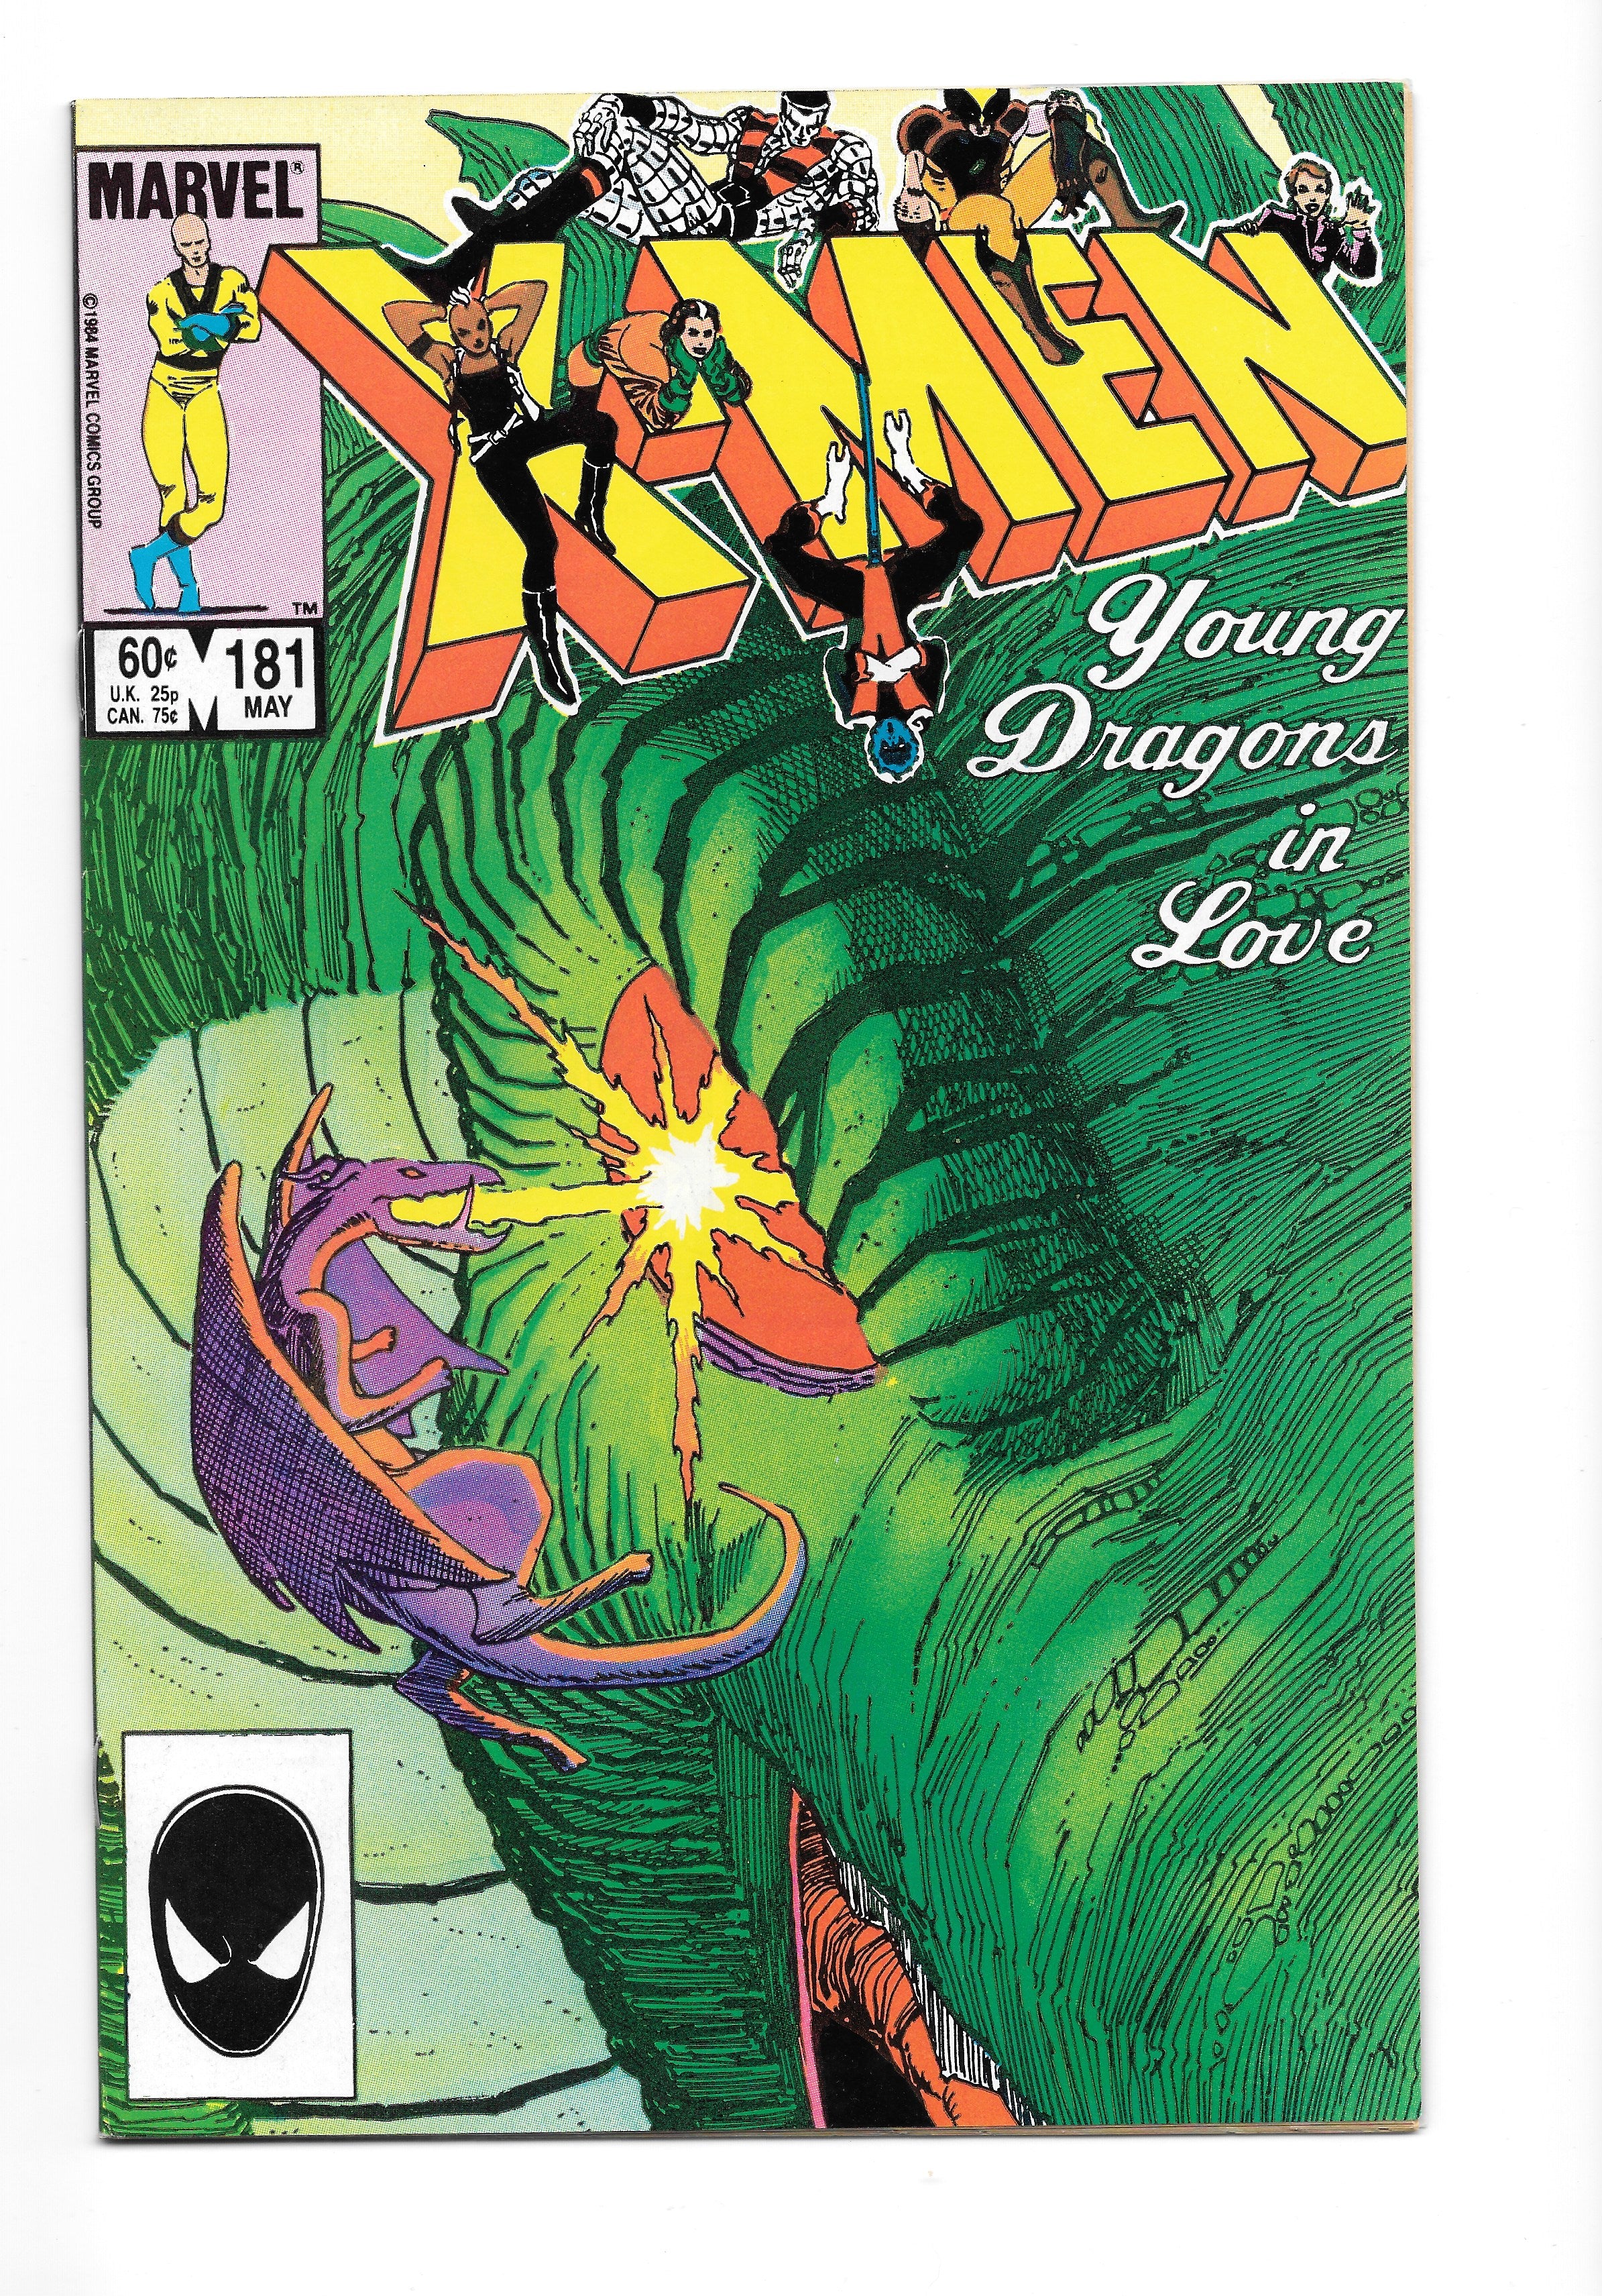 Photo of Uncanny X-Men, Vol. 1 (1984)  Iss 181A Very Fine/Near Mint  Comic sold by Stronghold Collectibles